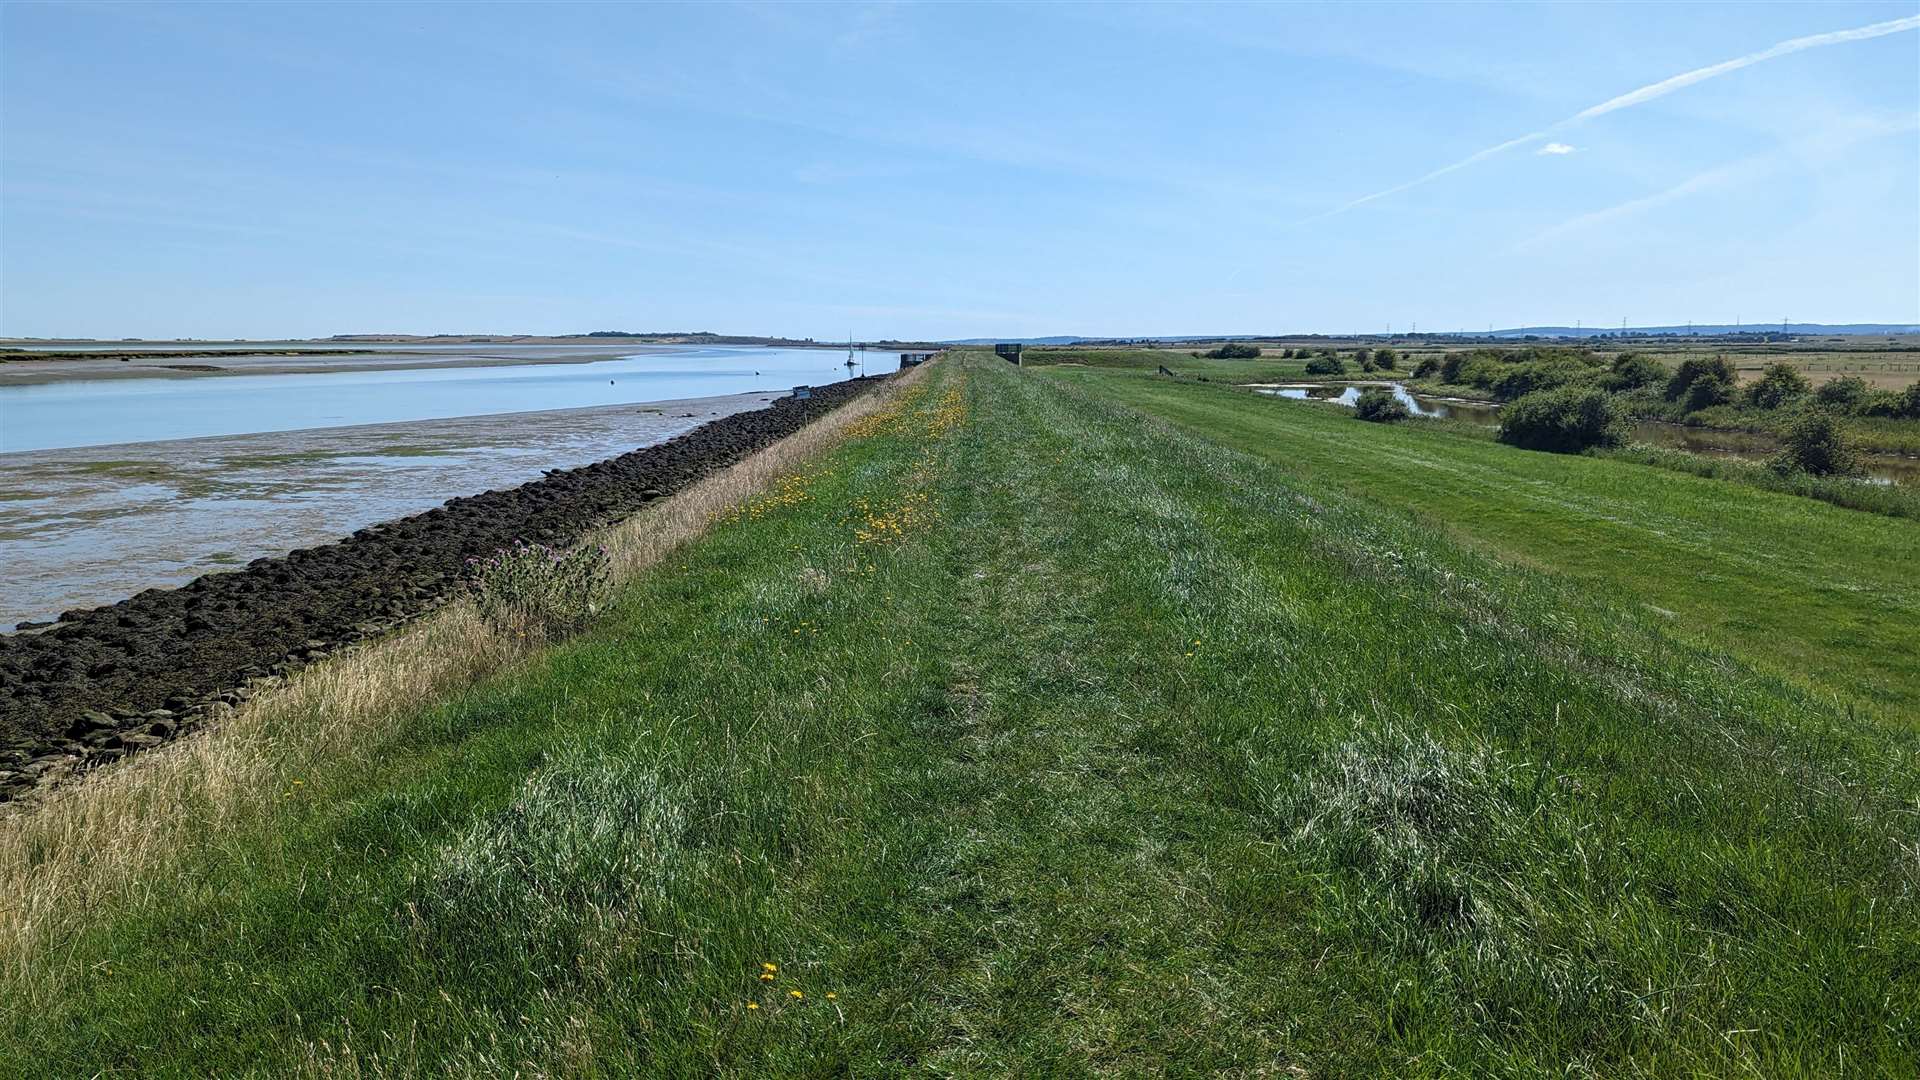 The elevated coastal path divides farmland on one side from the Swale channel on the other